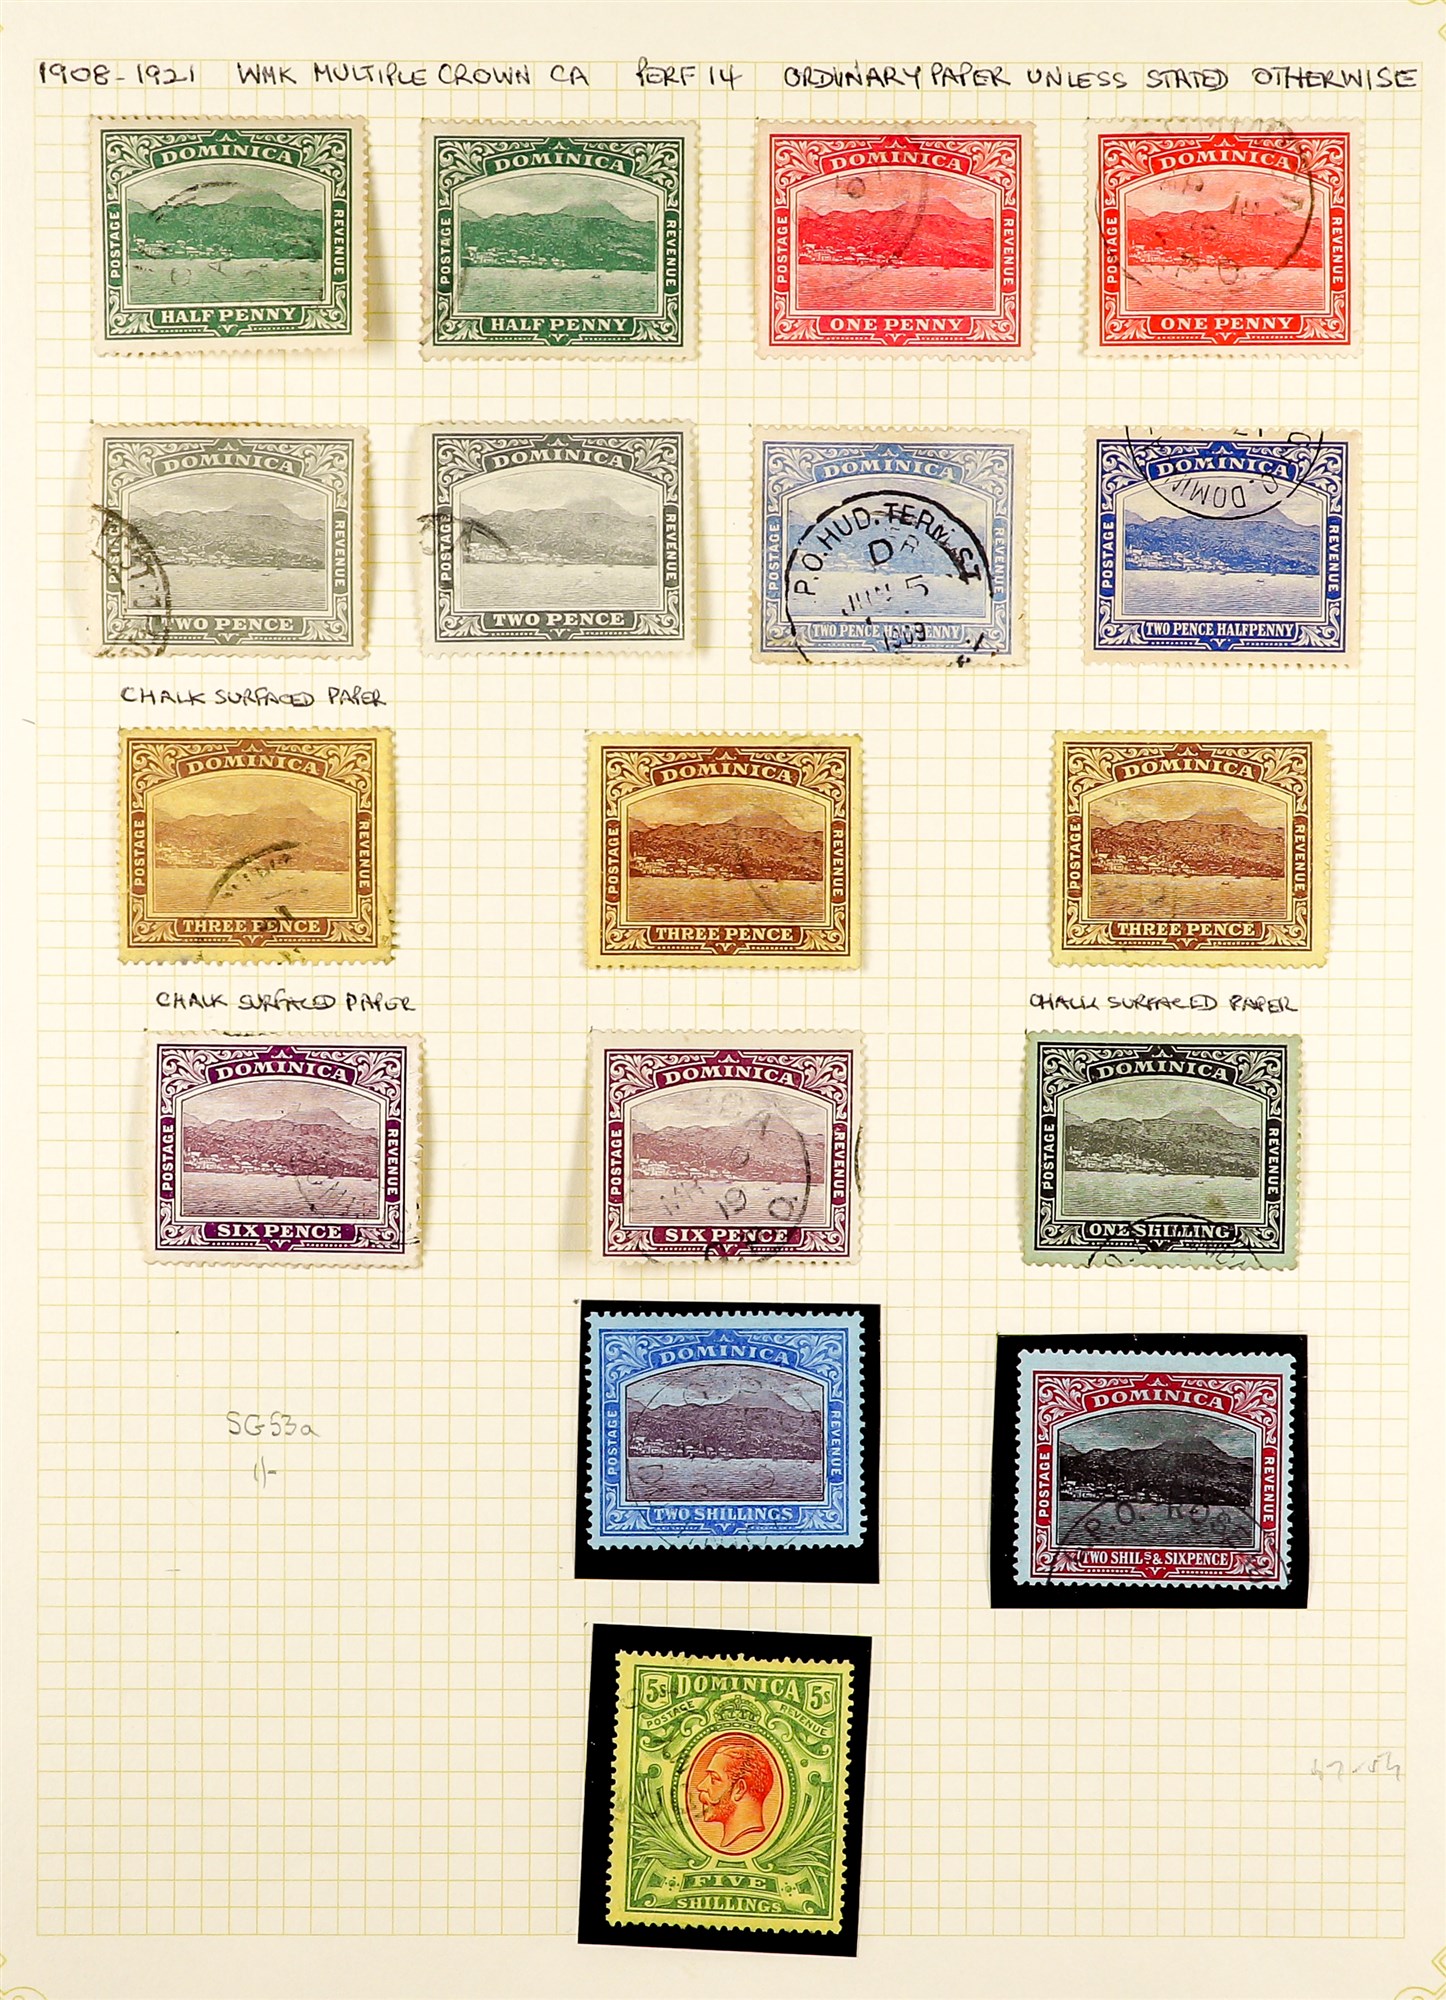 DOMINICA 1903 - 1935 COLLECTION of around 75 stamps on pages, note 1903-07 set to 2s6d, plus - Image 2 of 4